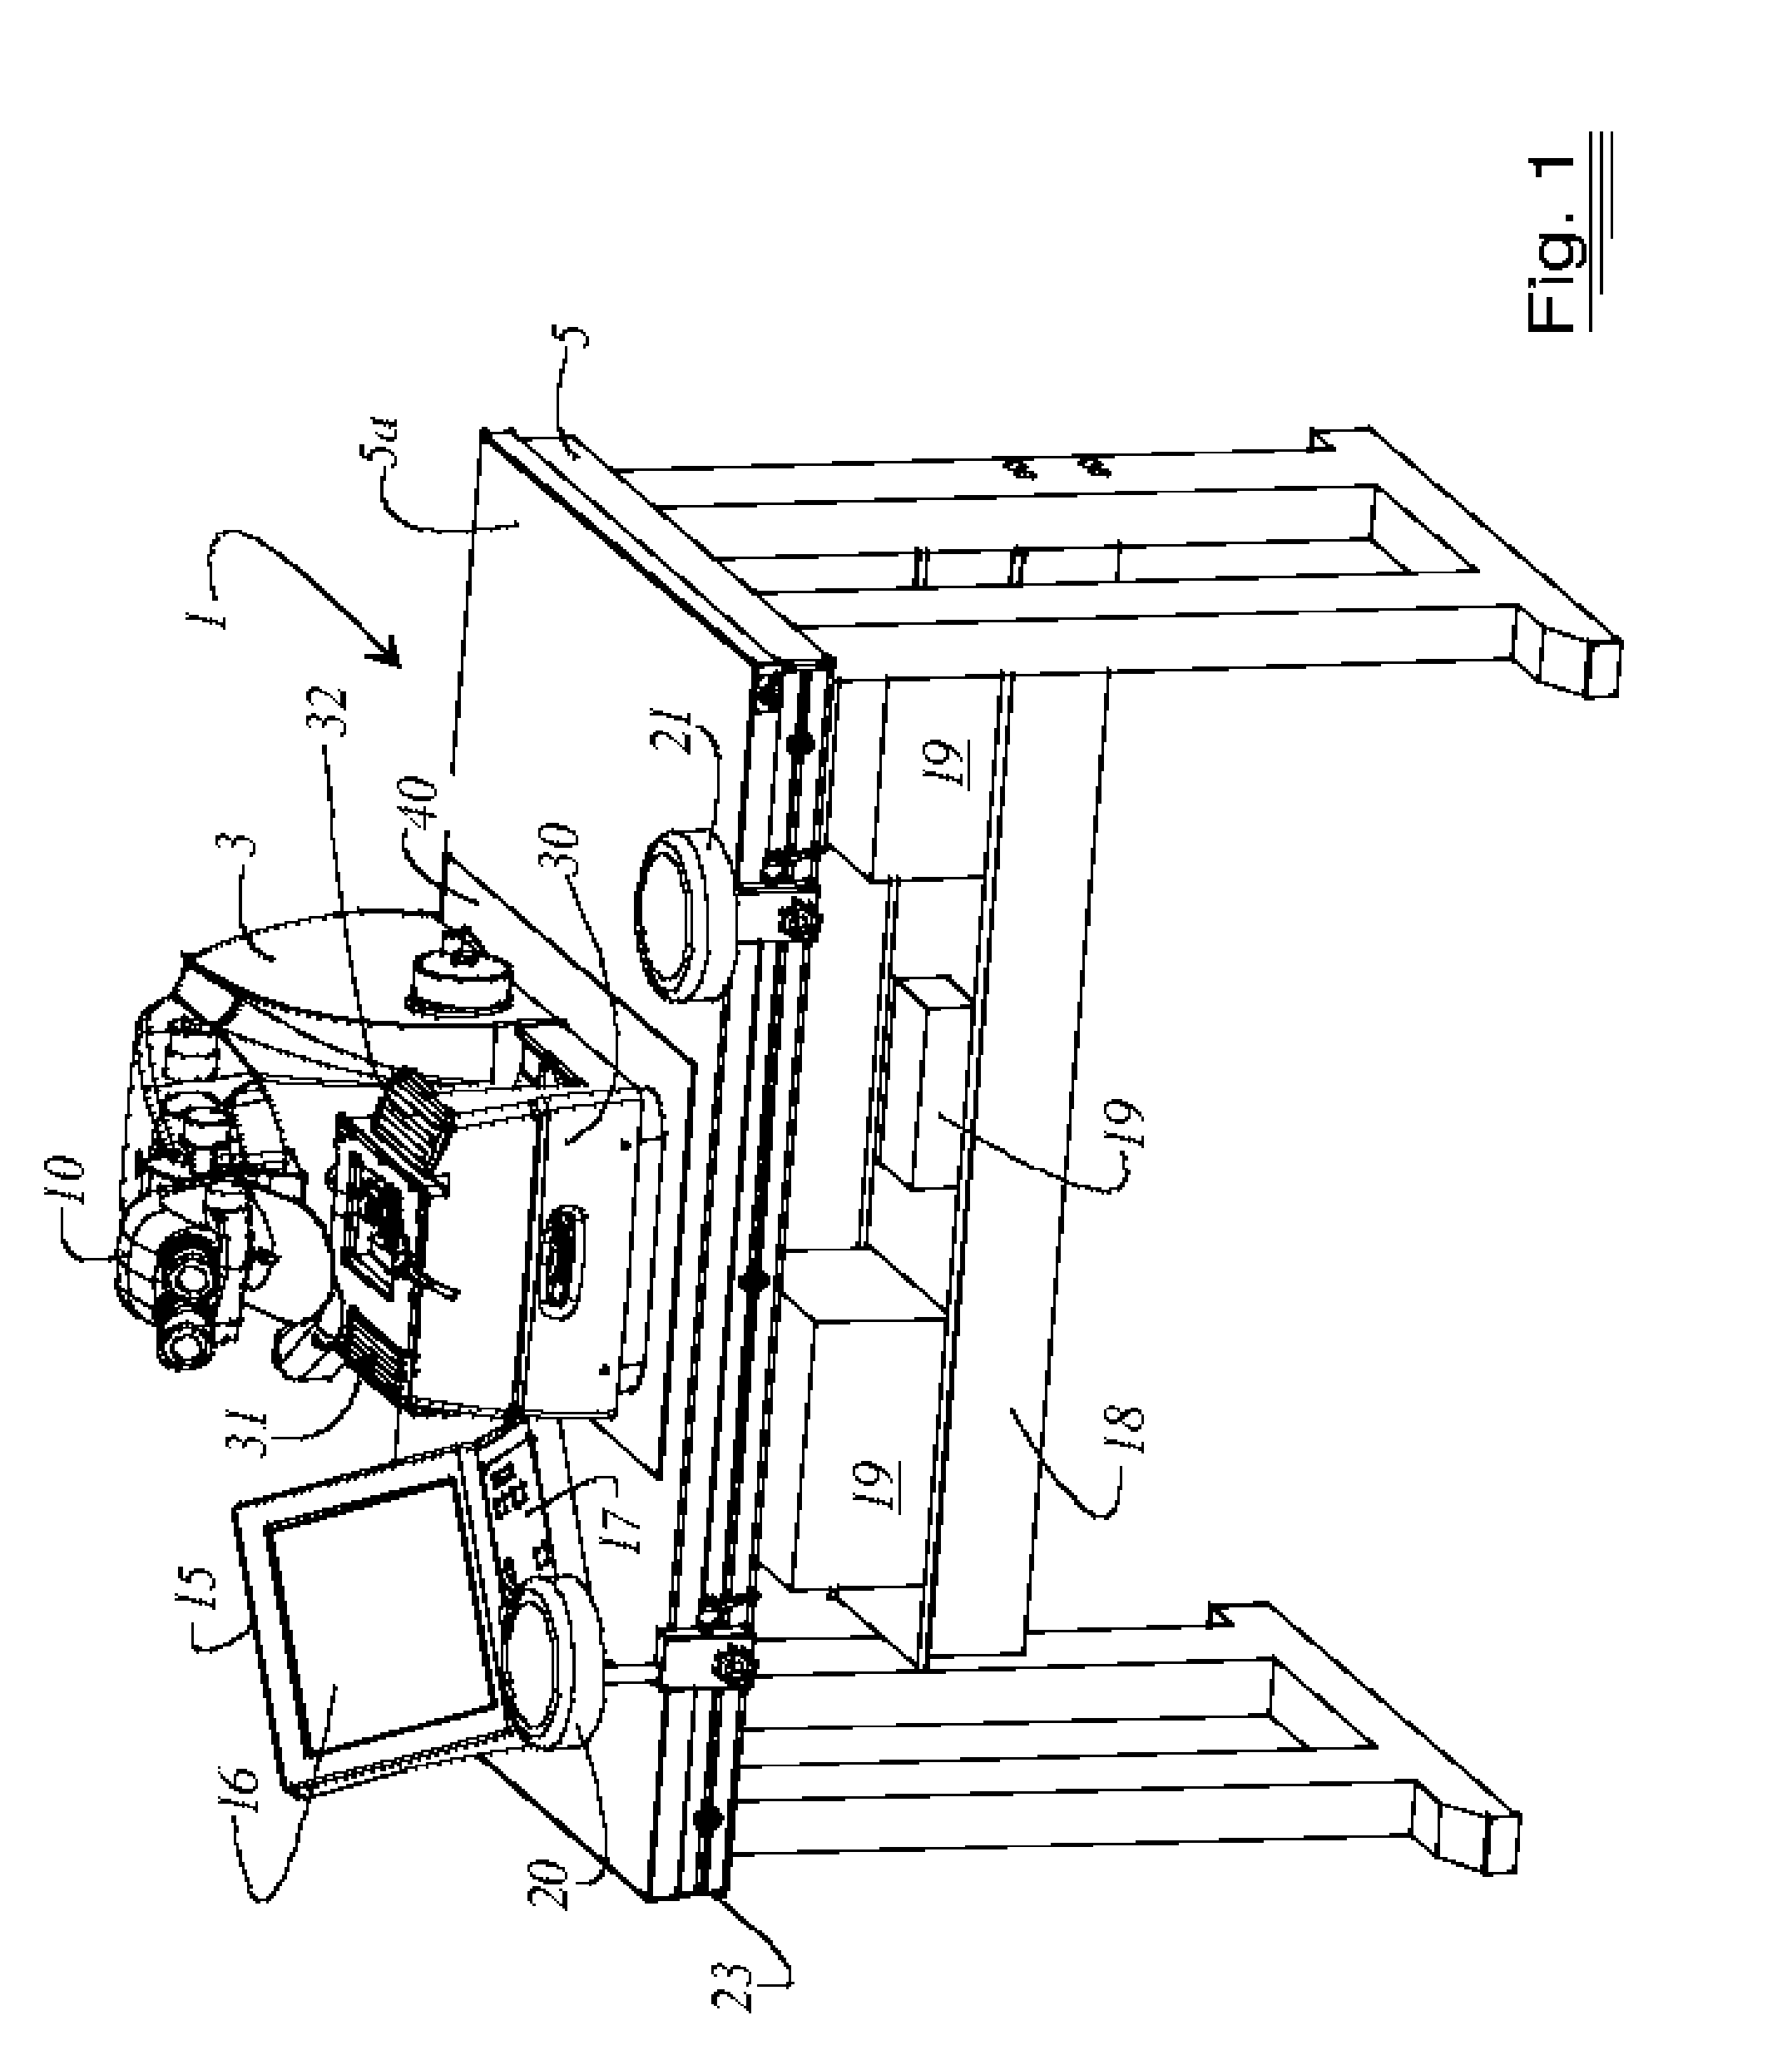 Device and method for trimming samples